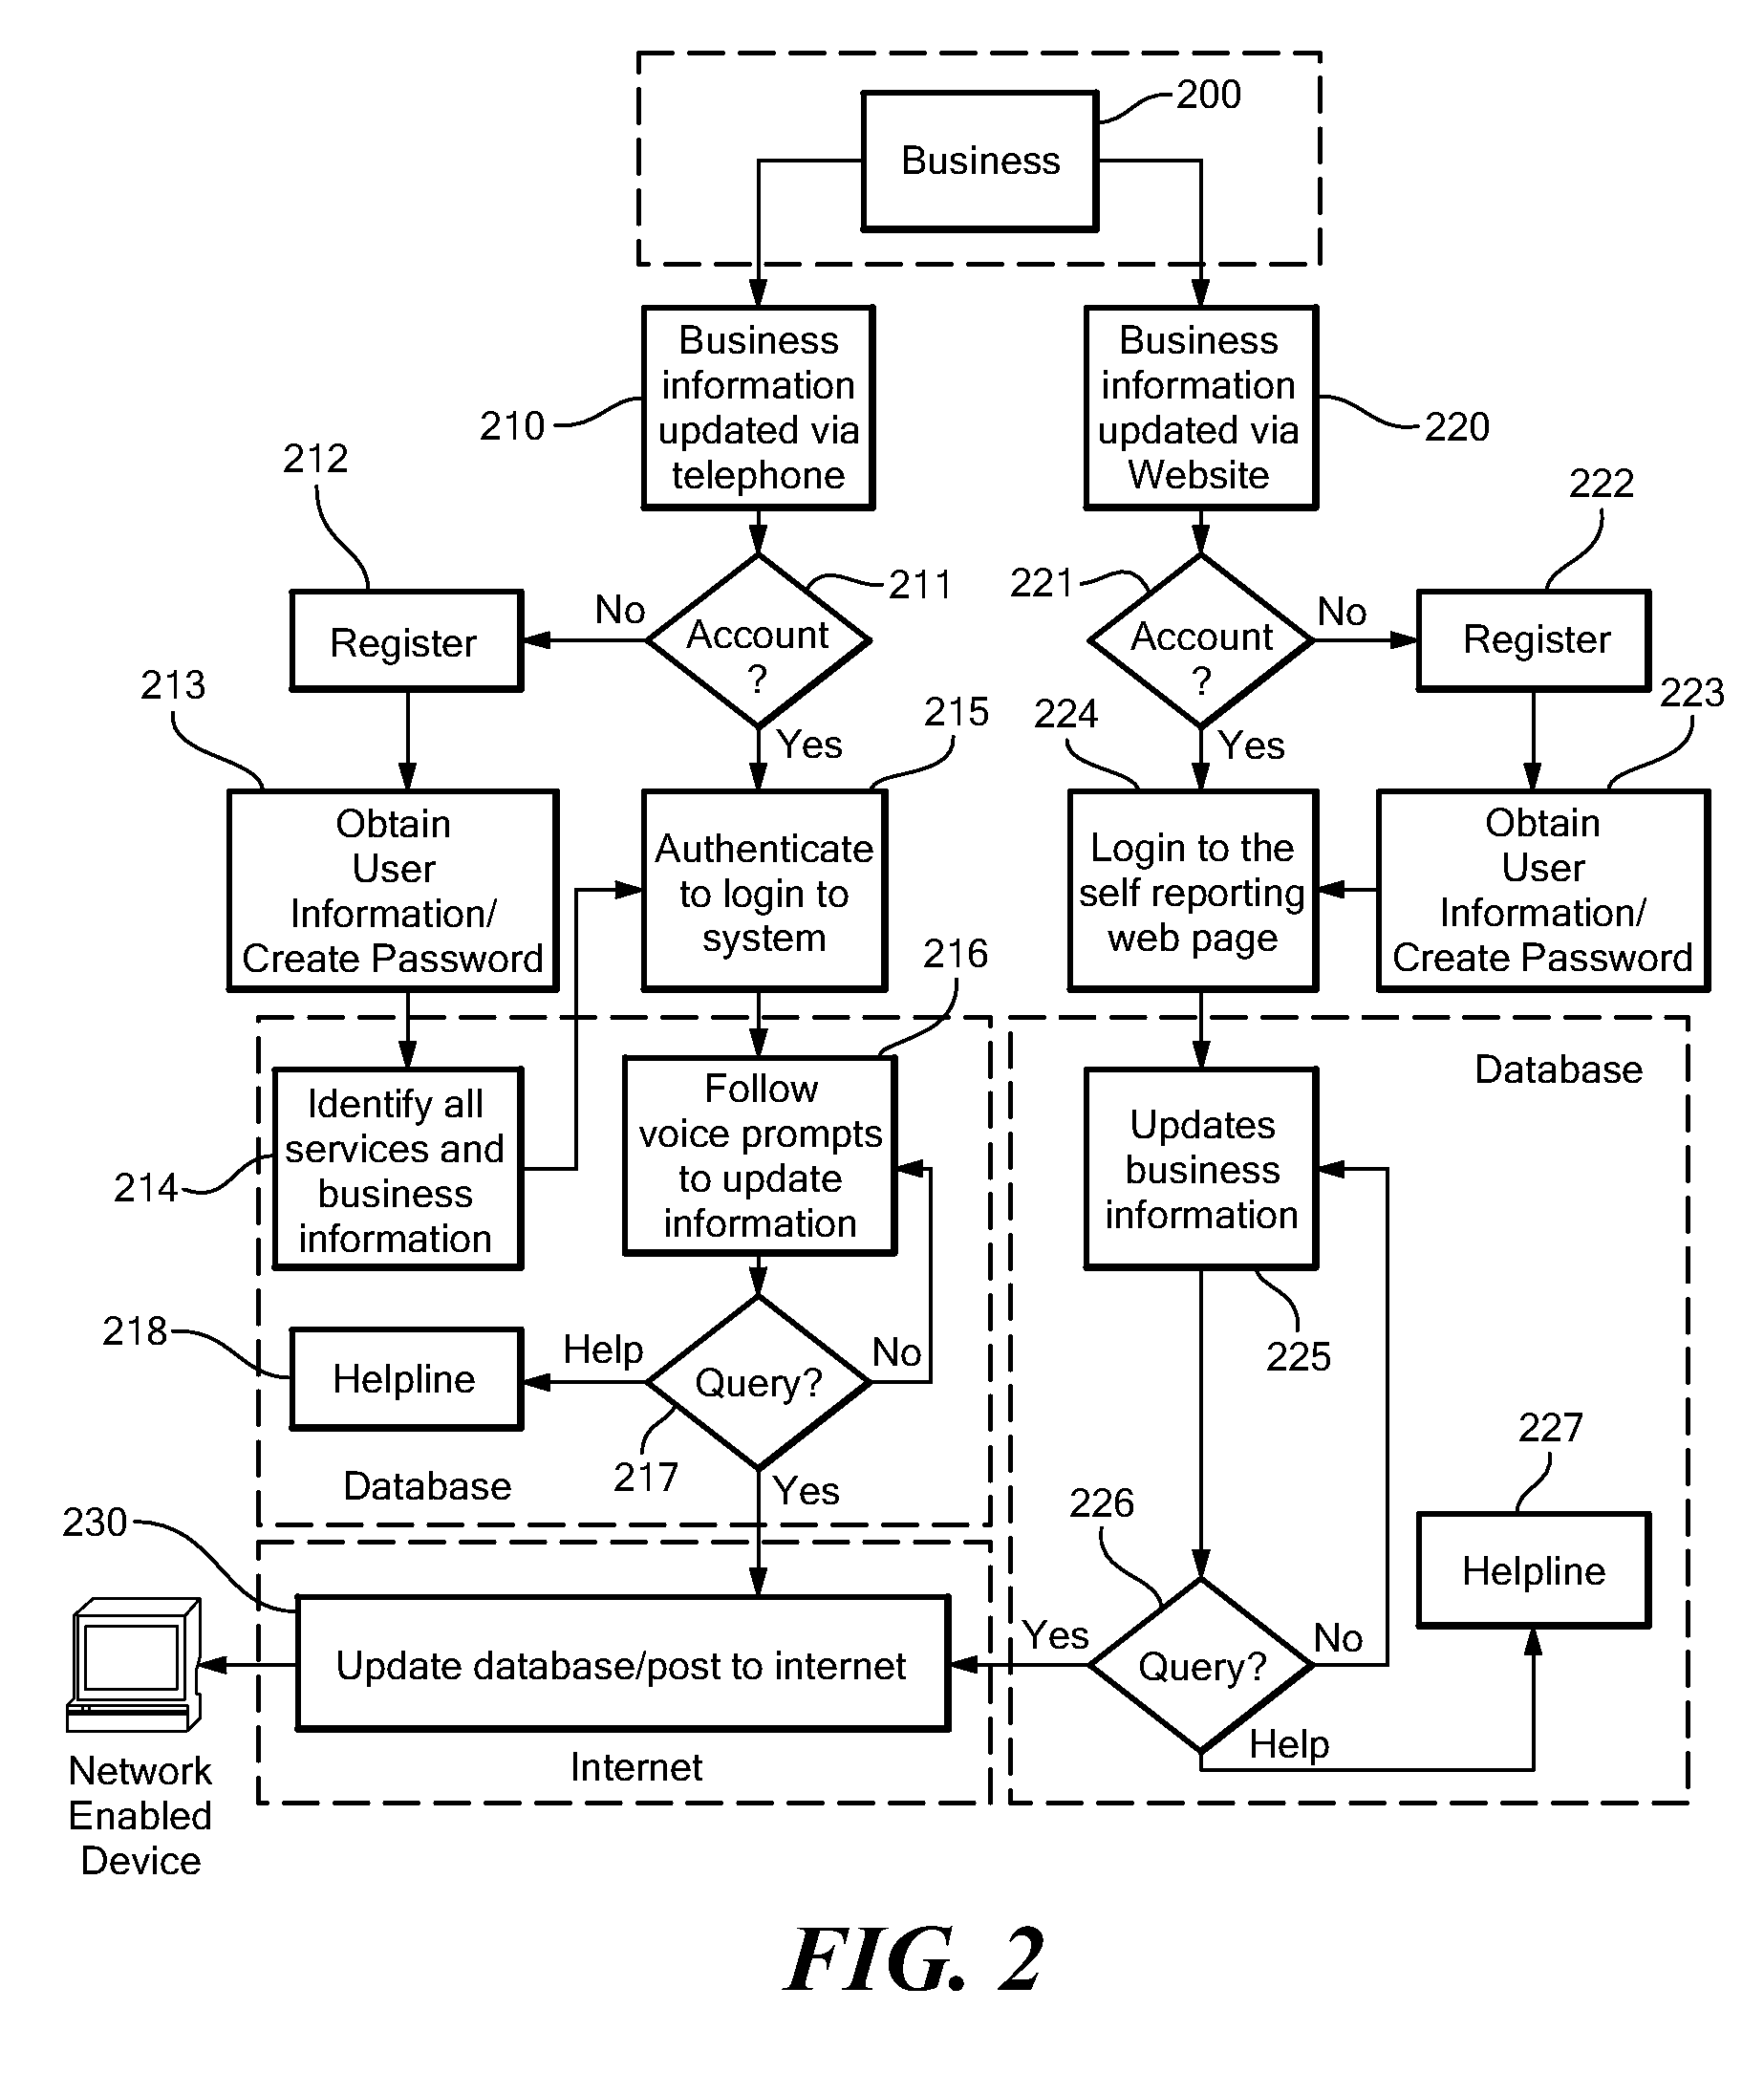 Apparatus and Methods for Providing Route-Based Advertising and Vendor-Reported Business Information over a Network